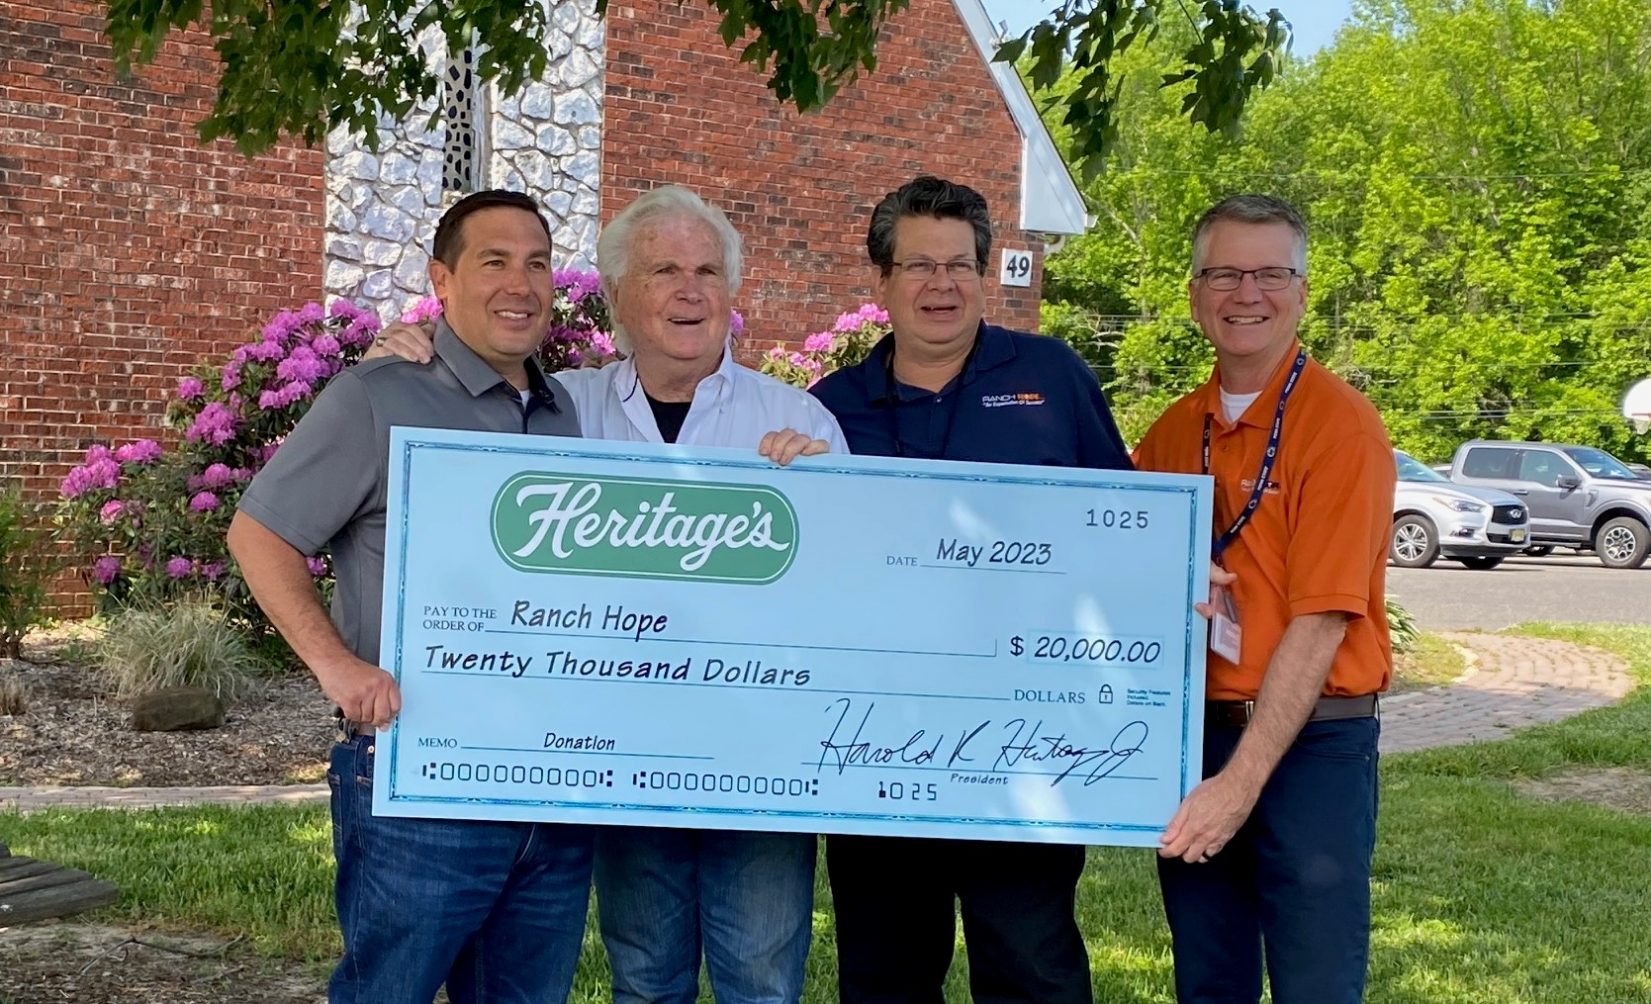 Heritage’s Raises $20,000 for Ranch Hope